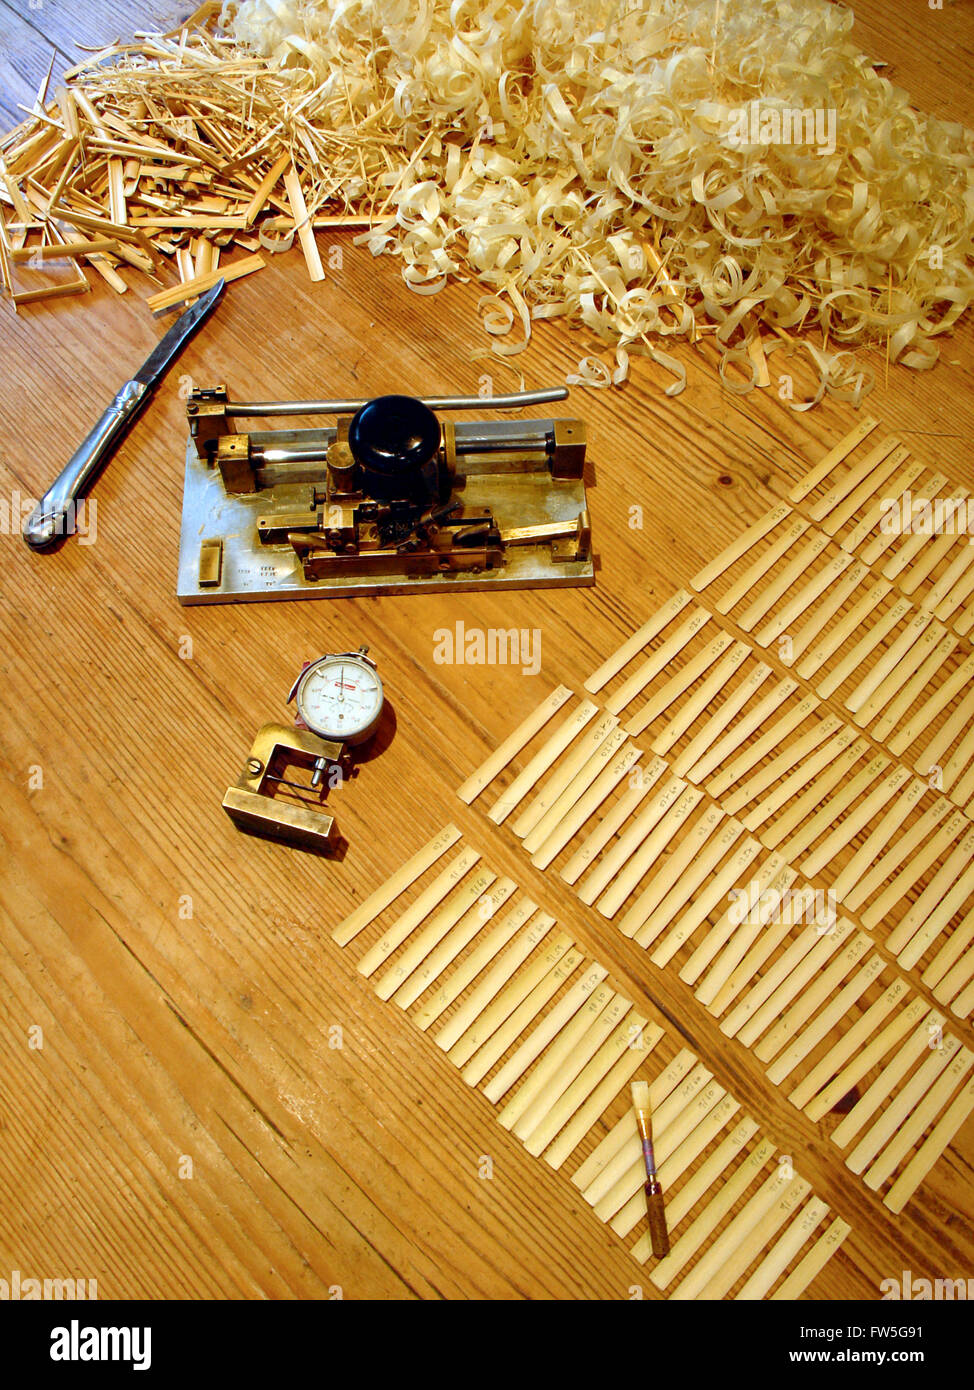 Reed cane (arundo donax) for making Oboe Reeds. Gouged cane pieces, with oboe reed, gouging machine (plane), dial micrometer. Stock Photo